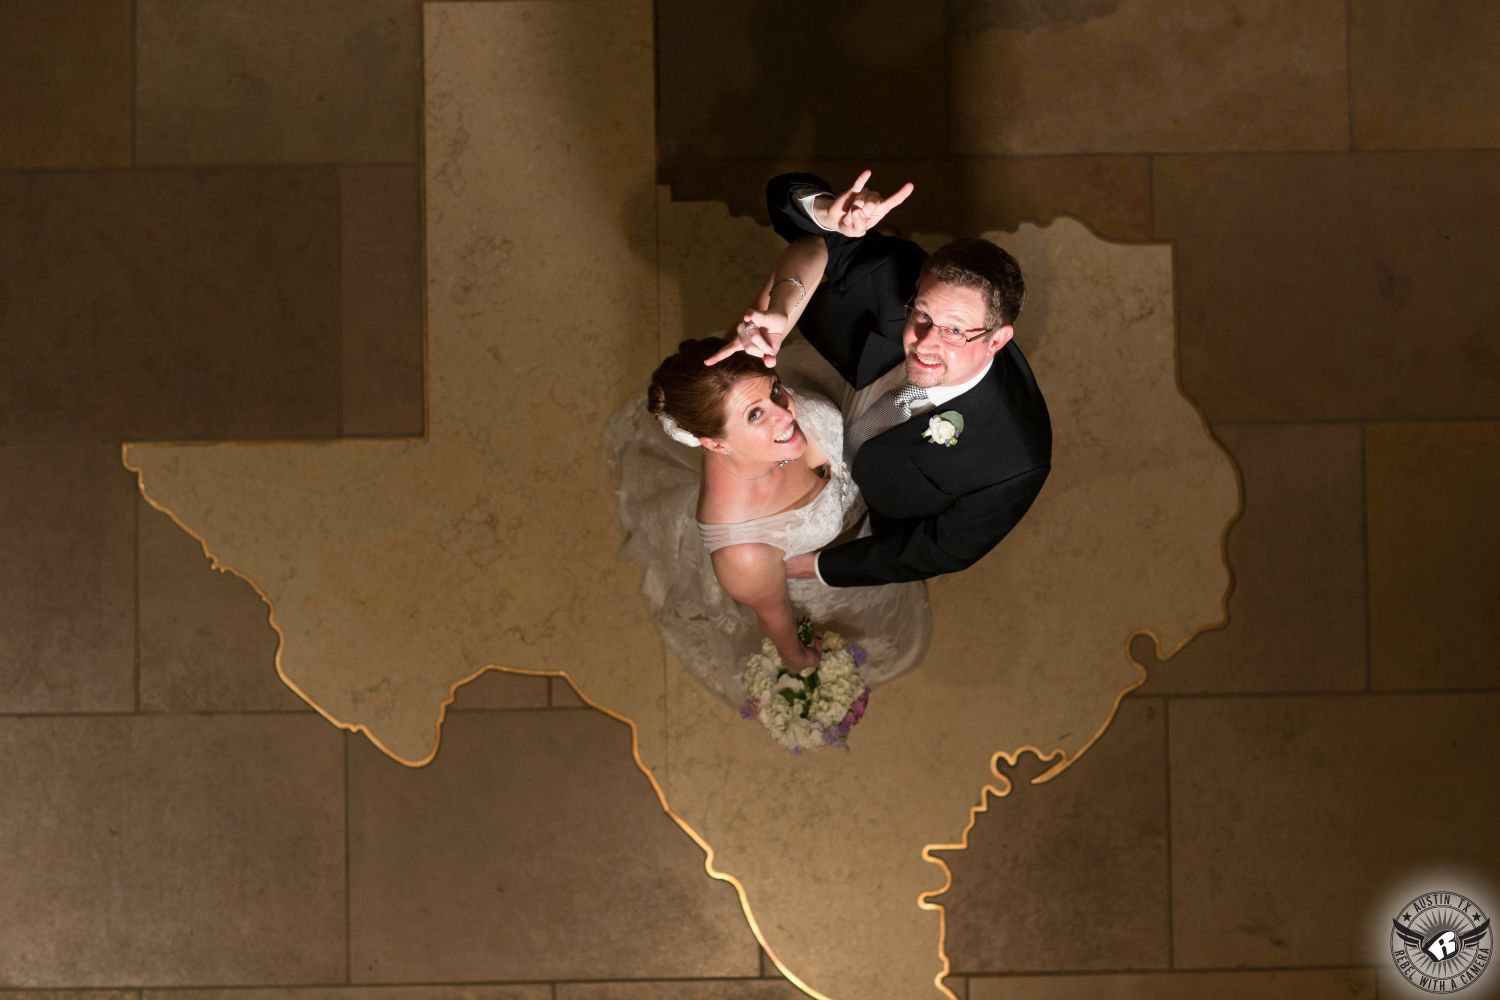 Longhorn bride in strapless dress and groom in black tuxedo hook 'em horns in Texas state outline at AT&T Executive Education and Conference Center on the University of Texas campus during their wedding reception in Austin texas coordinated by Barbara's Brides.